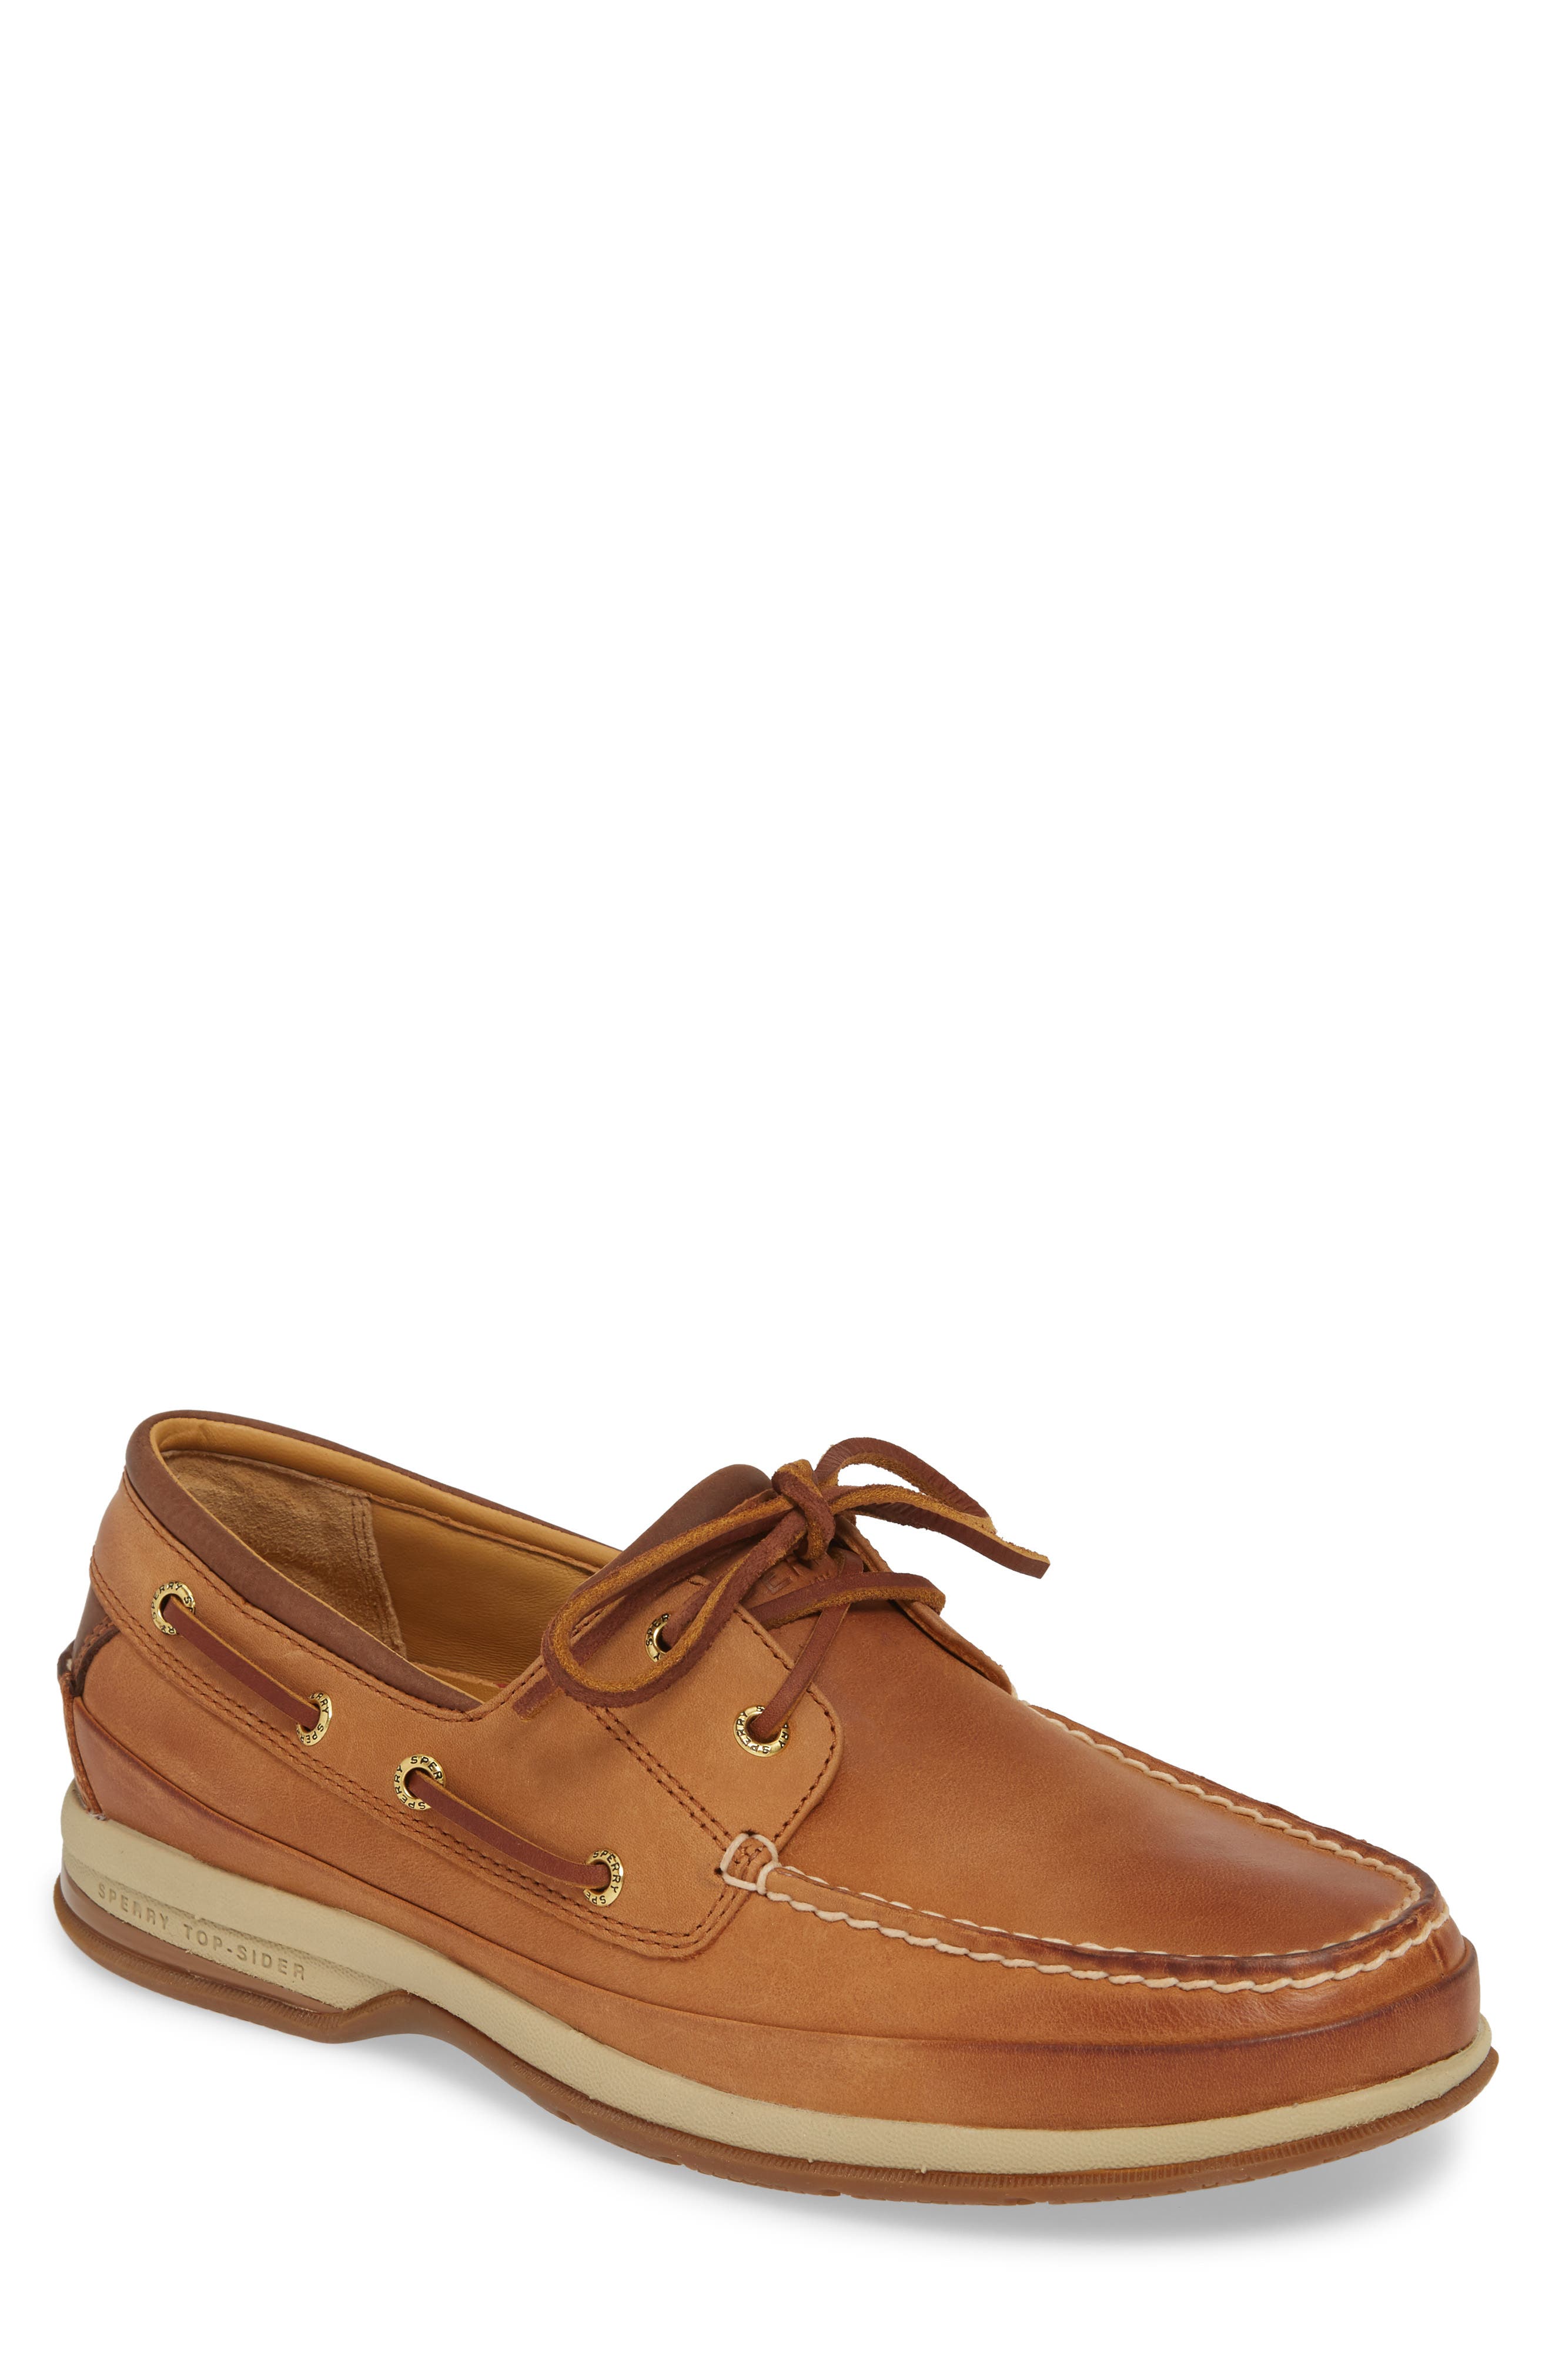 nordstrom sperry boots